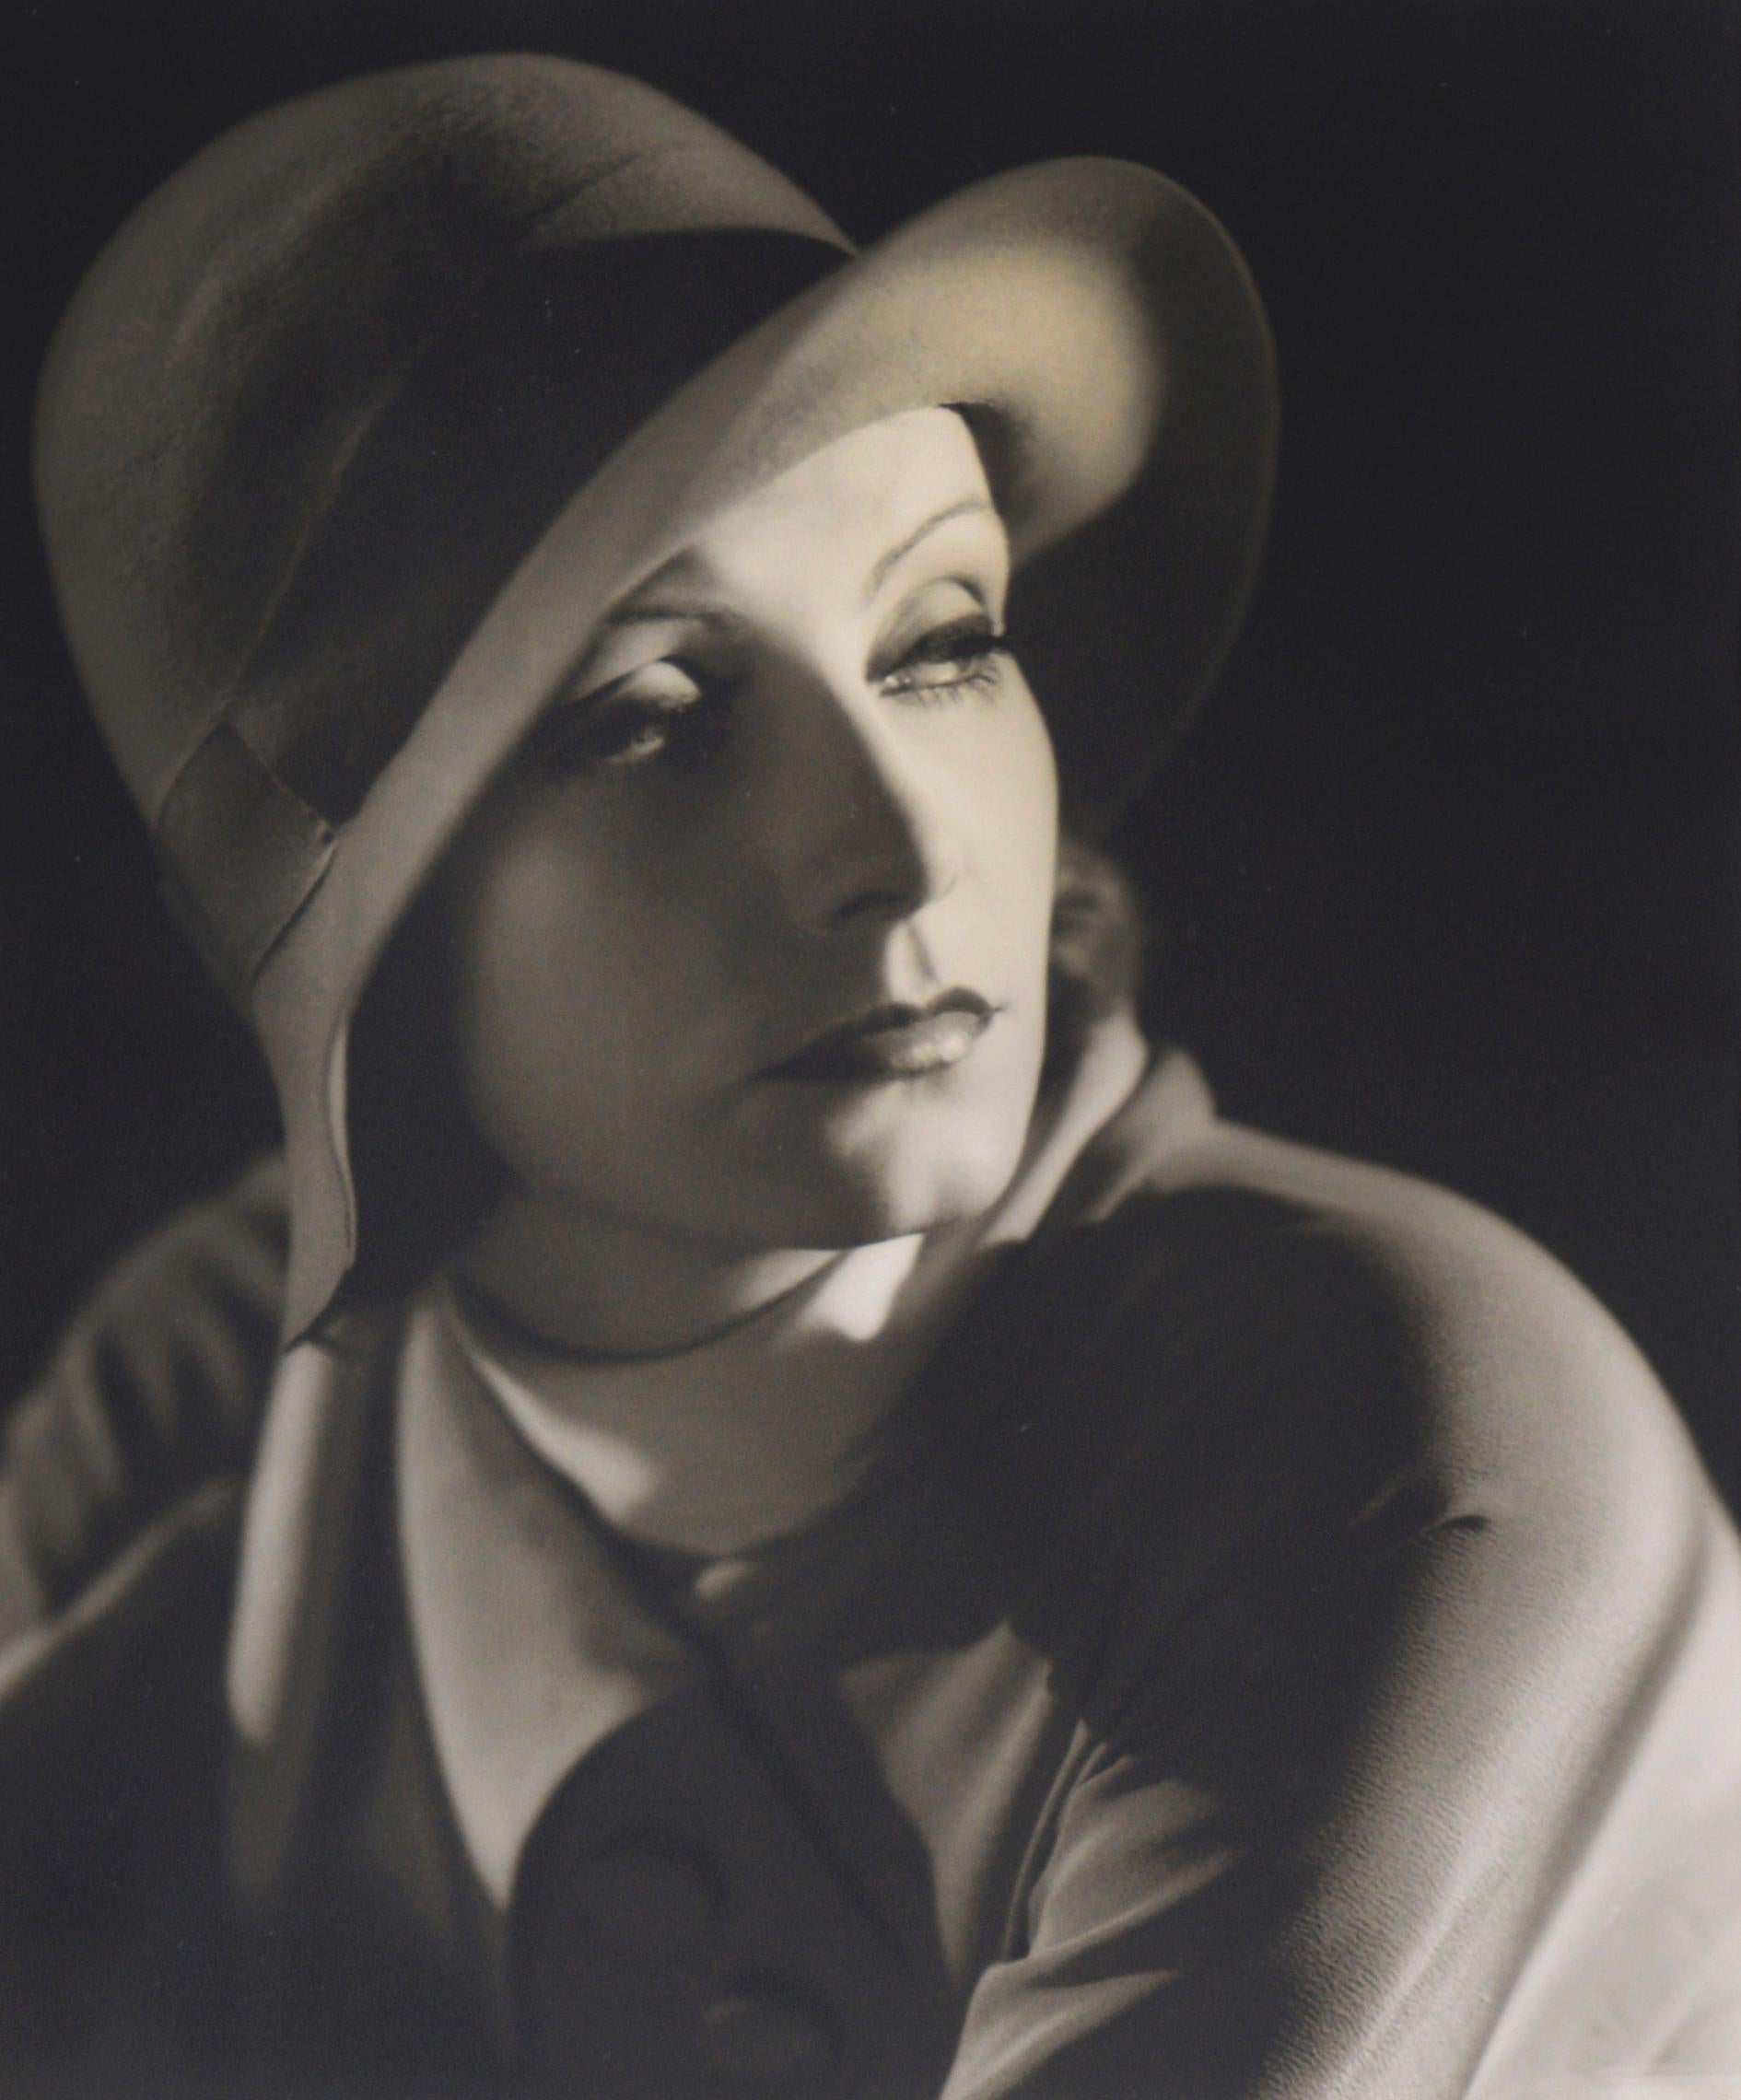 Greta Garbo - Black and White Photograph by Clarence Sinclair Bull, 1930 For Sale 2